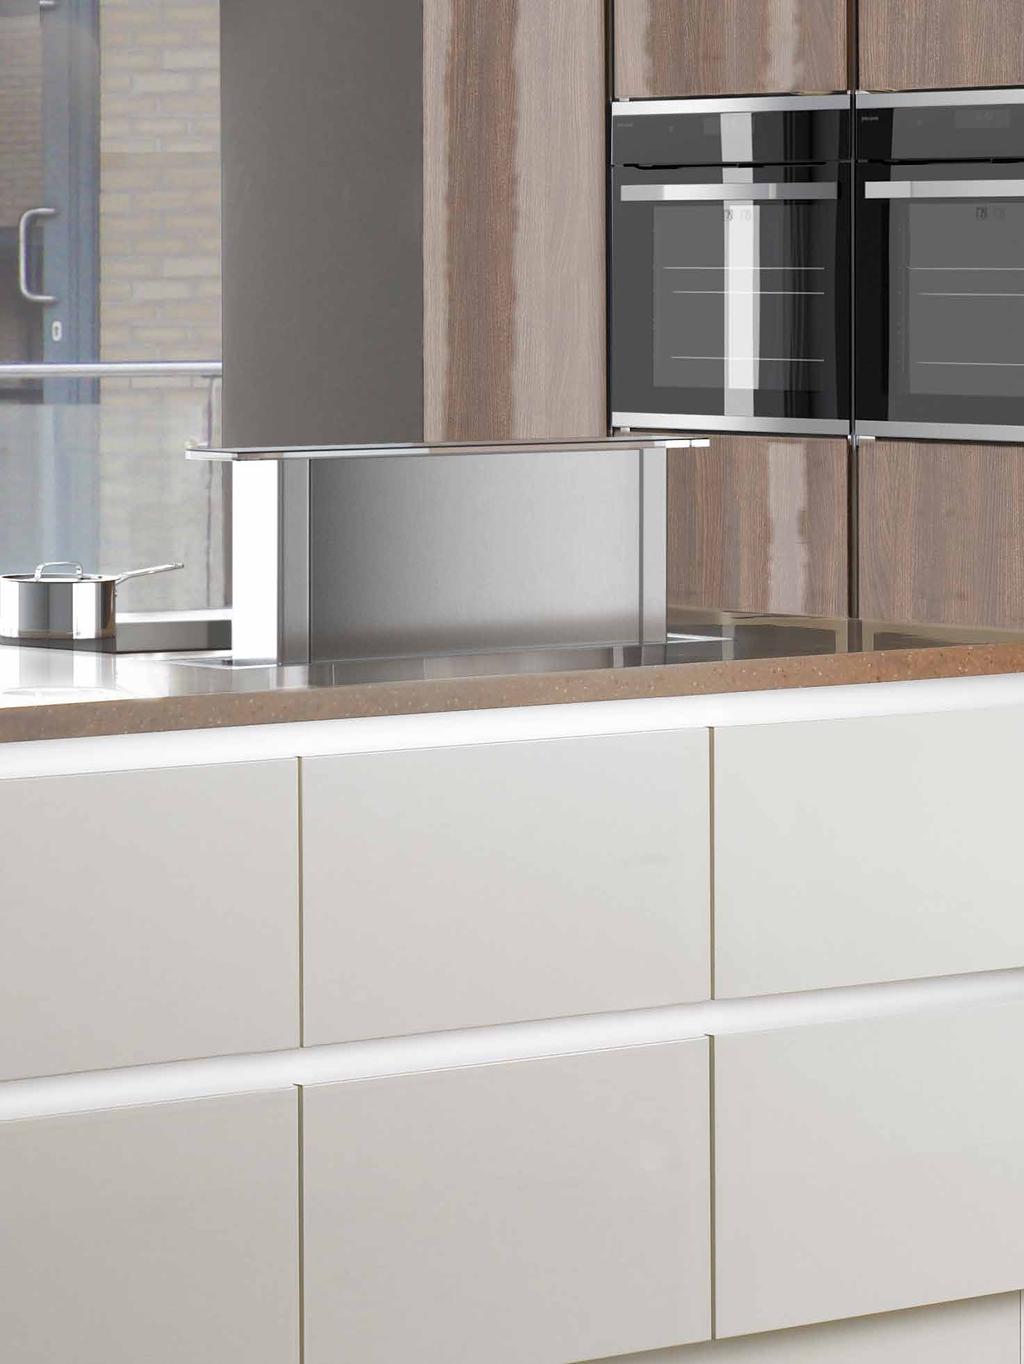 Cooker hoods Our new collection of hoods has something for every style of kitchen and is designed with you in mind.